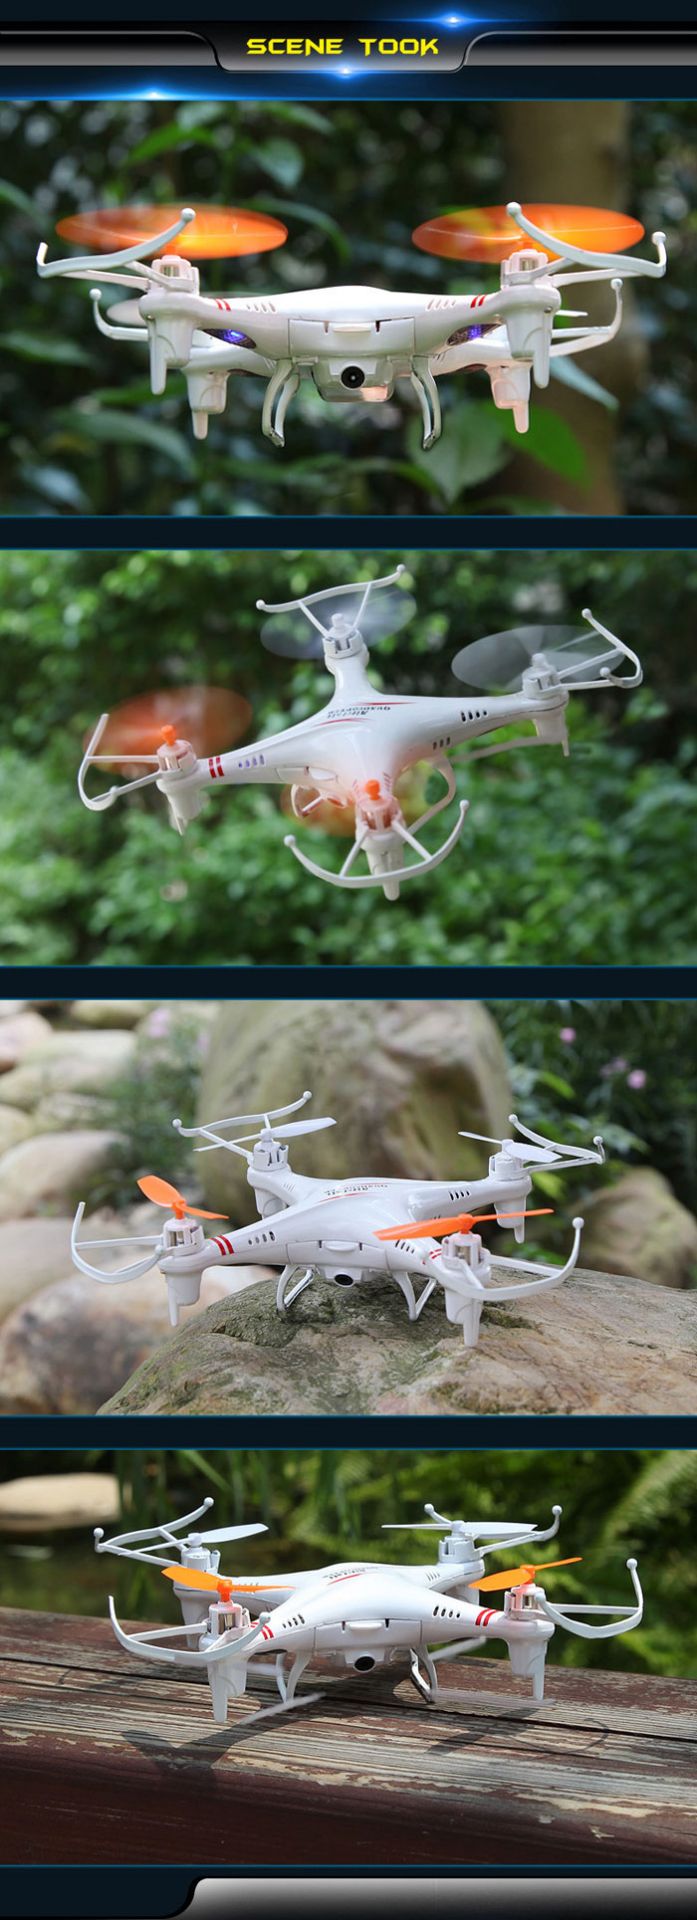 SKYTEC RC QUADCOPTER 4 CHANNEL 6 AXIS 2.4Ghz BNIB - Image 9 of 14